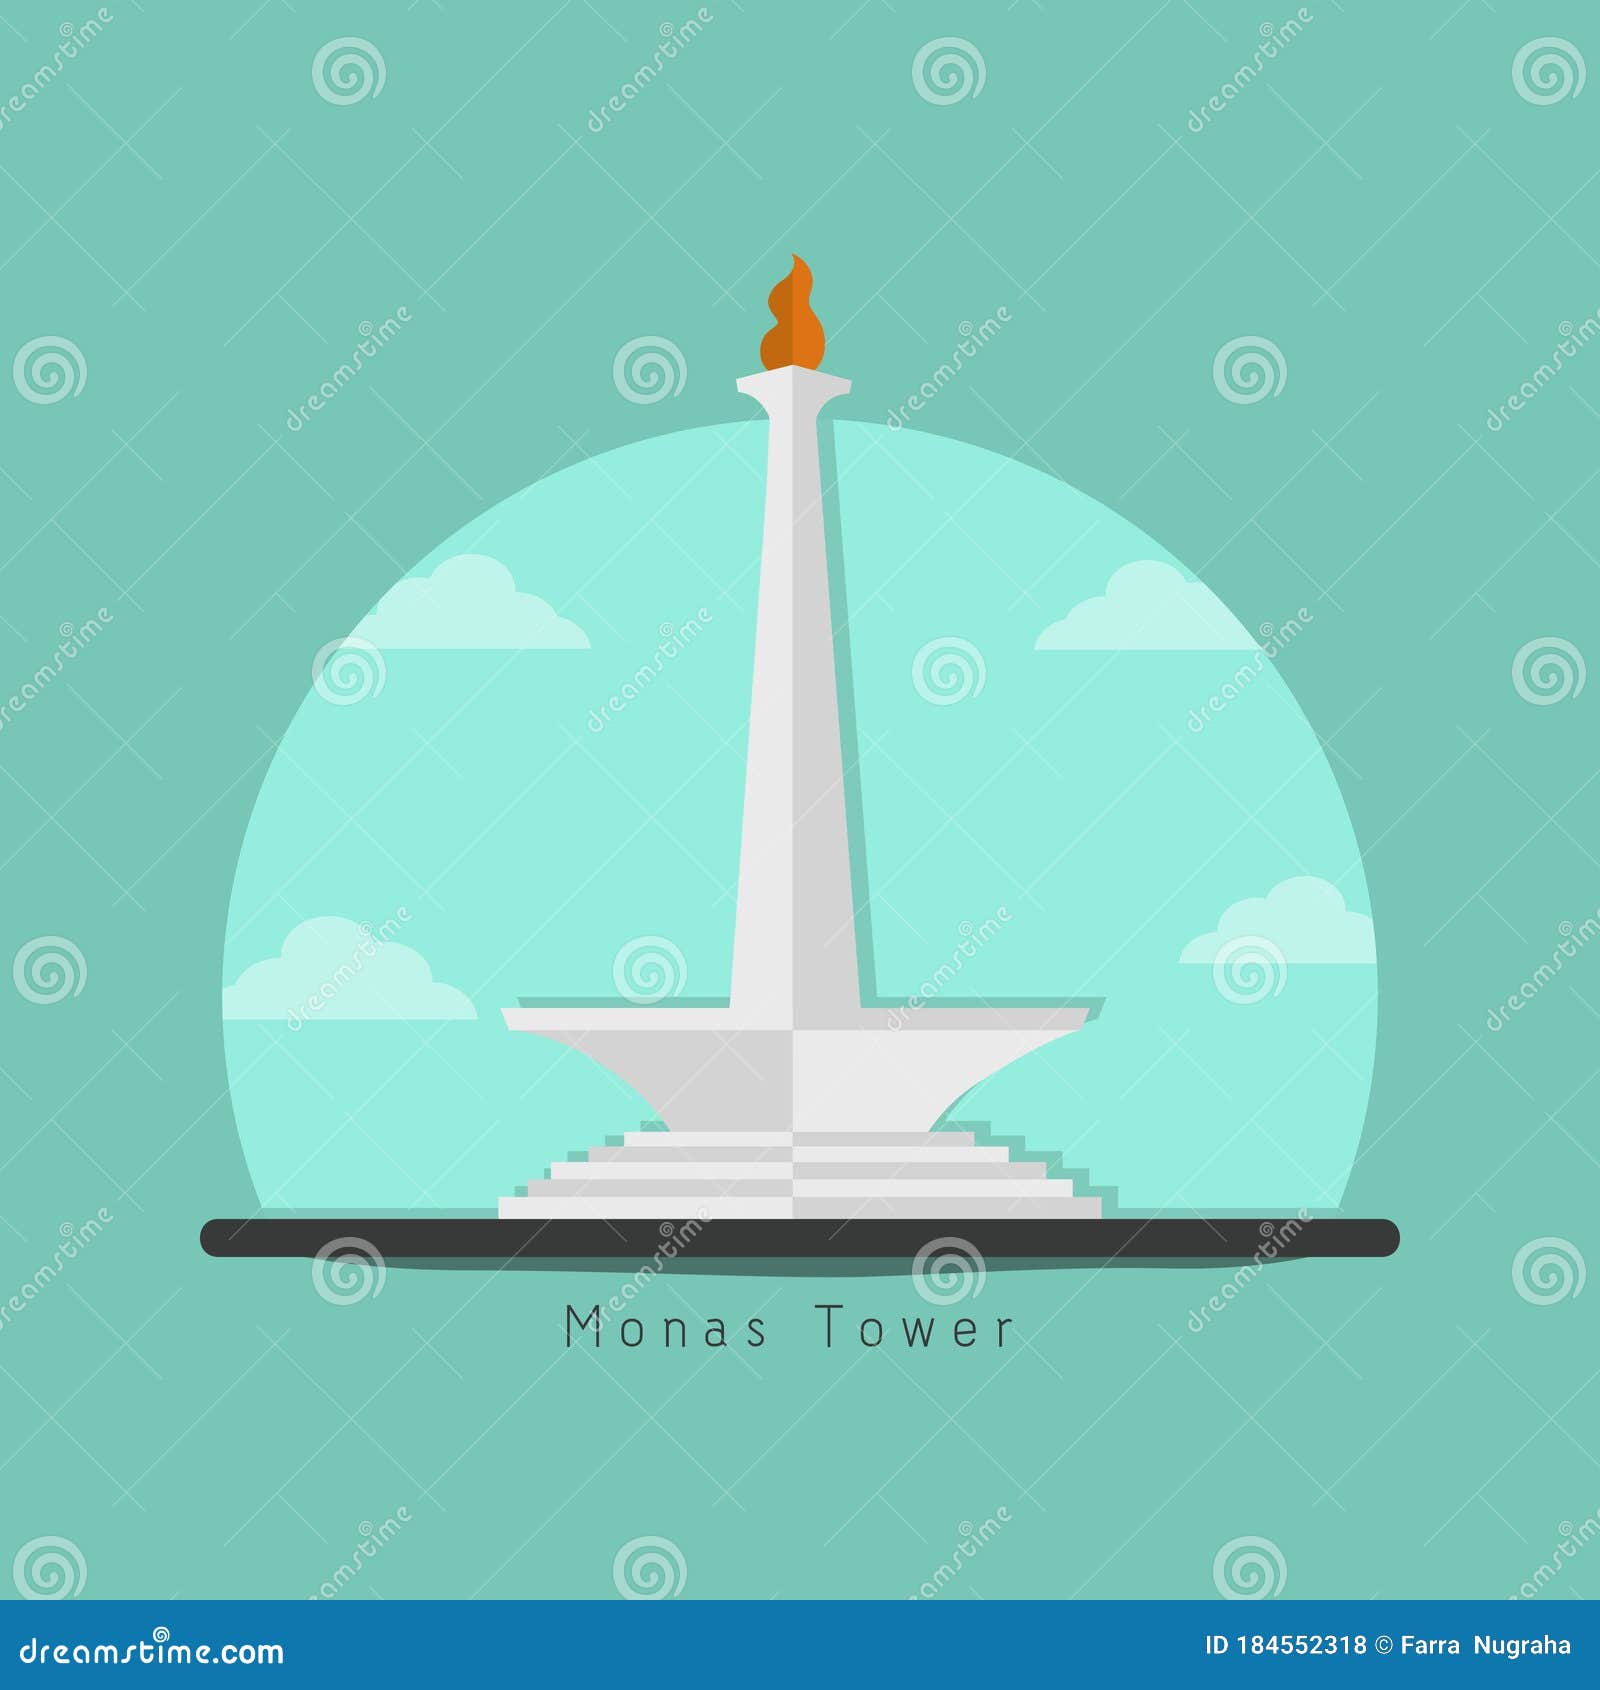 Monas Tower The Mascot Building From Jakarta City Indonesia Vector